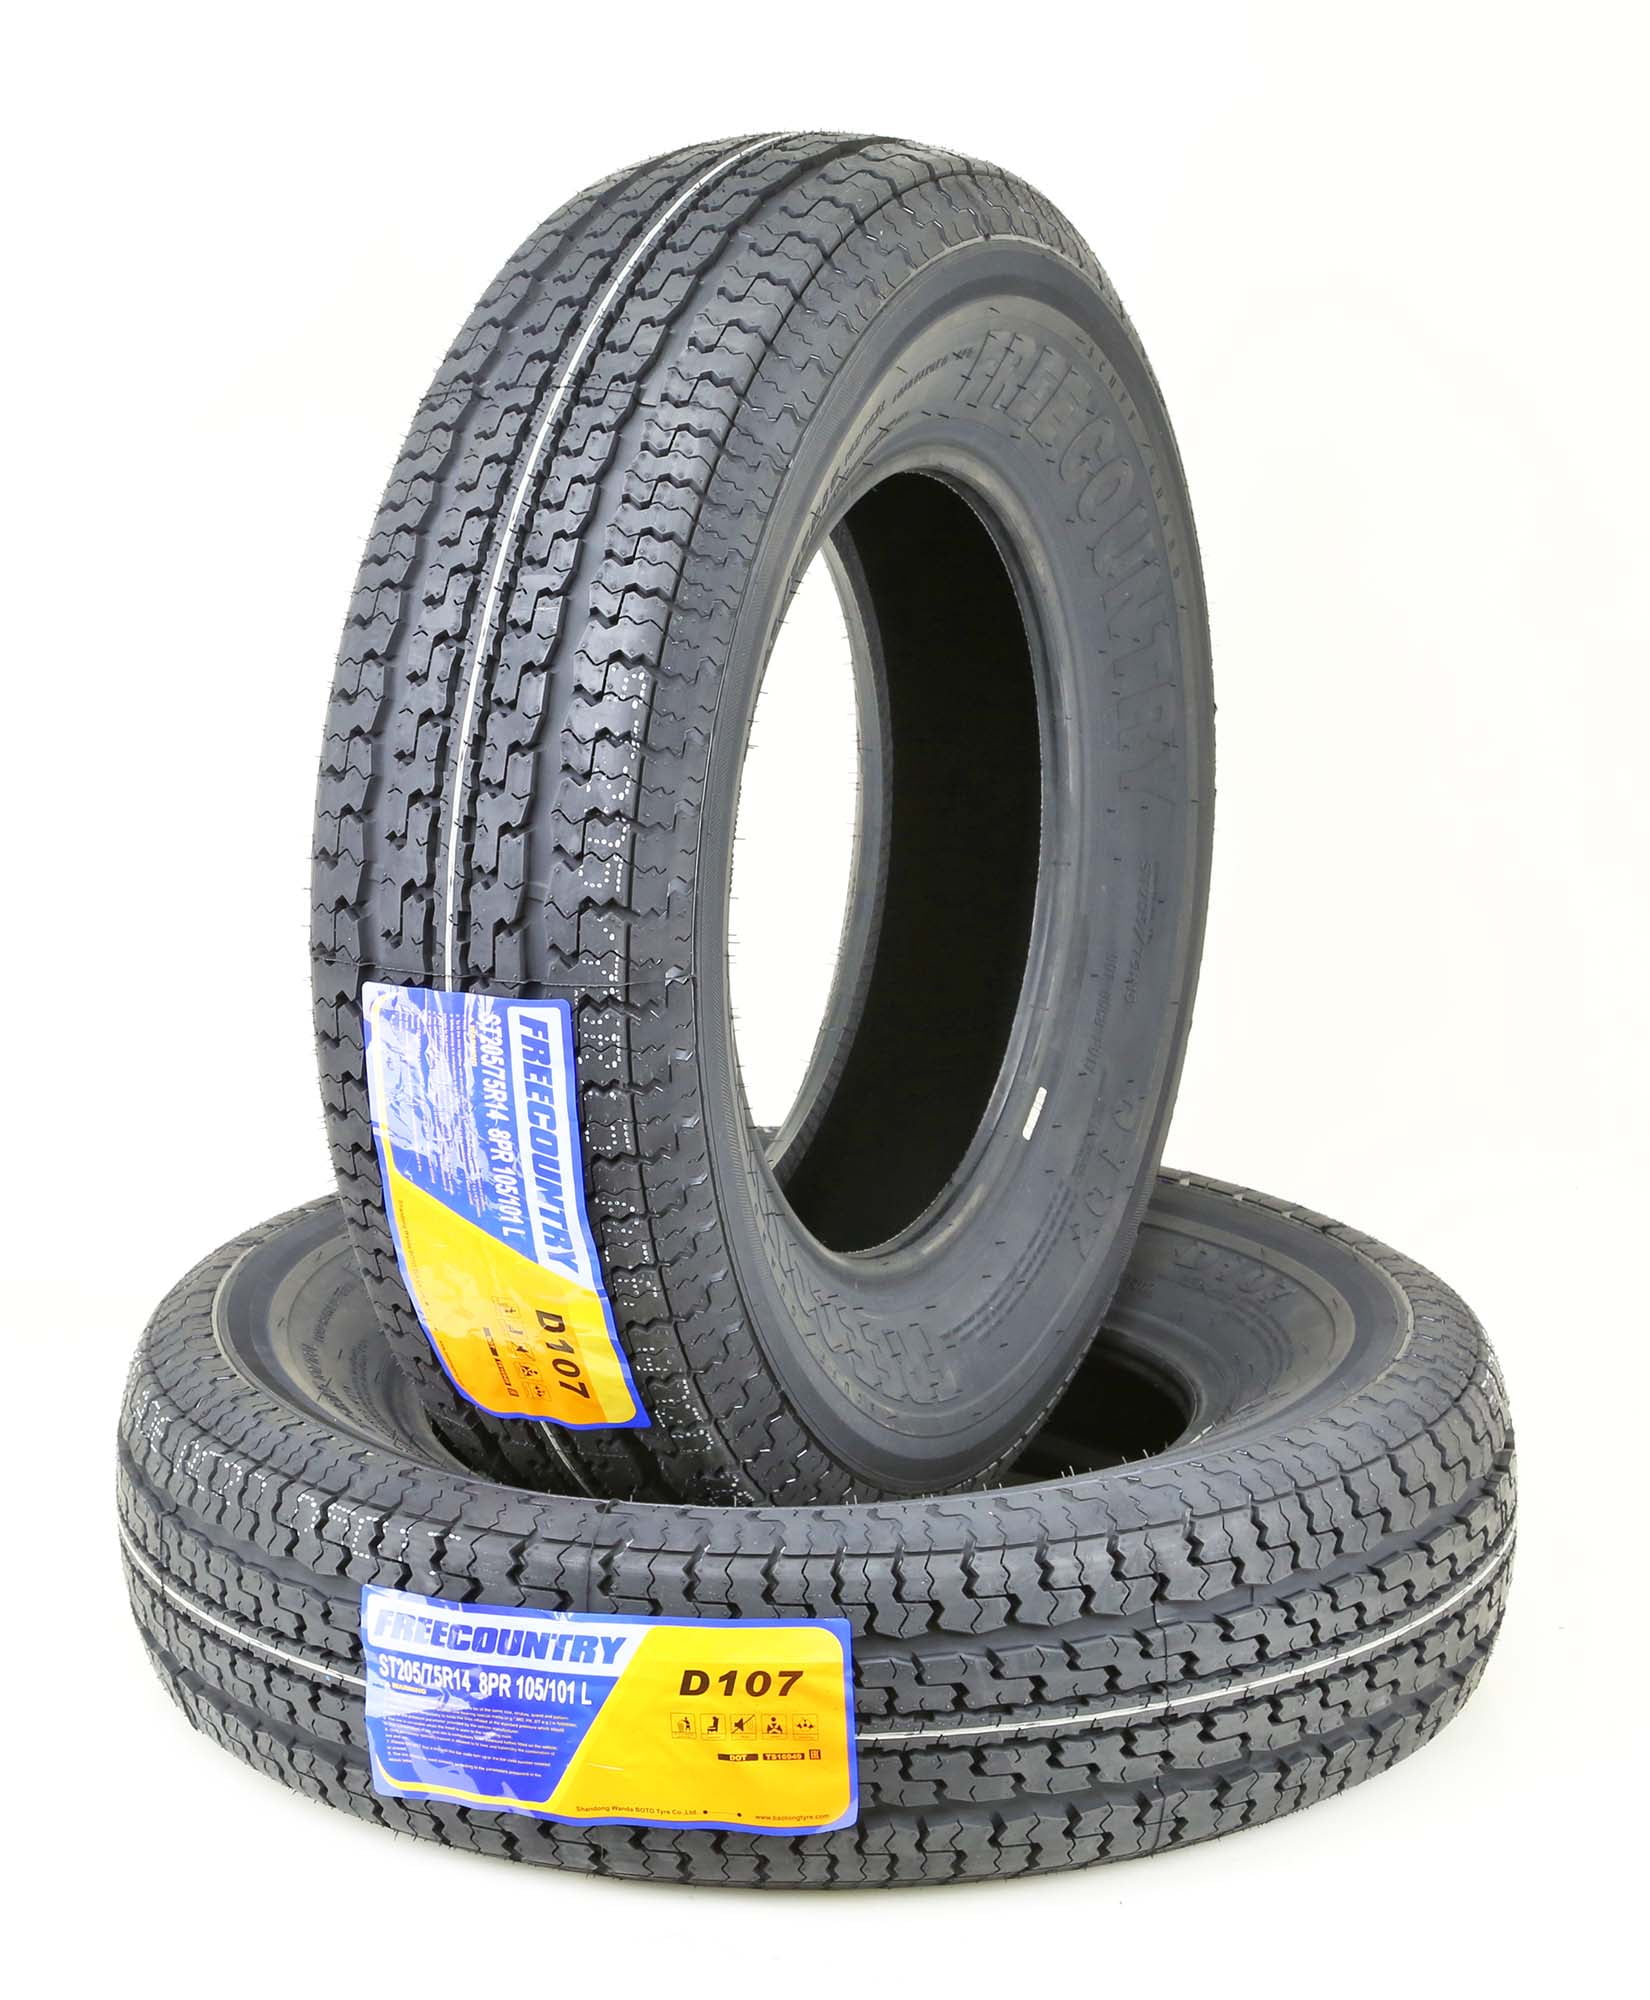 3 Premium FREE COUNTRY Trailer Tires ST 205/75R14 8PR Load Range D Steel Belted w/Scuff Guard 